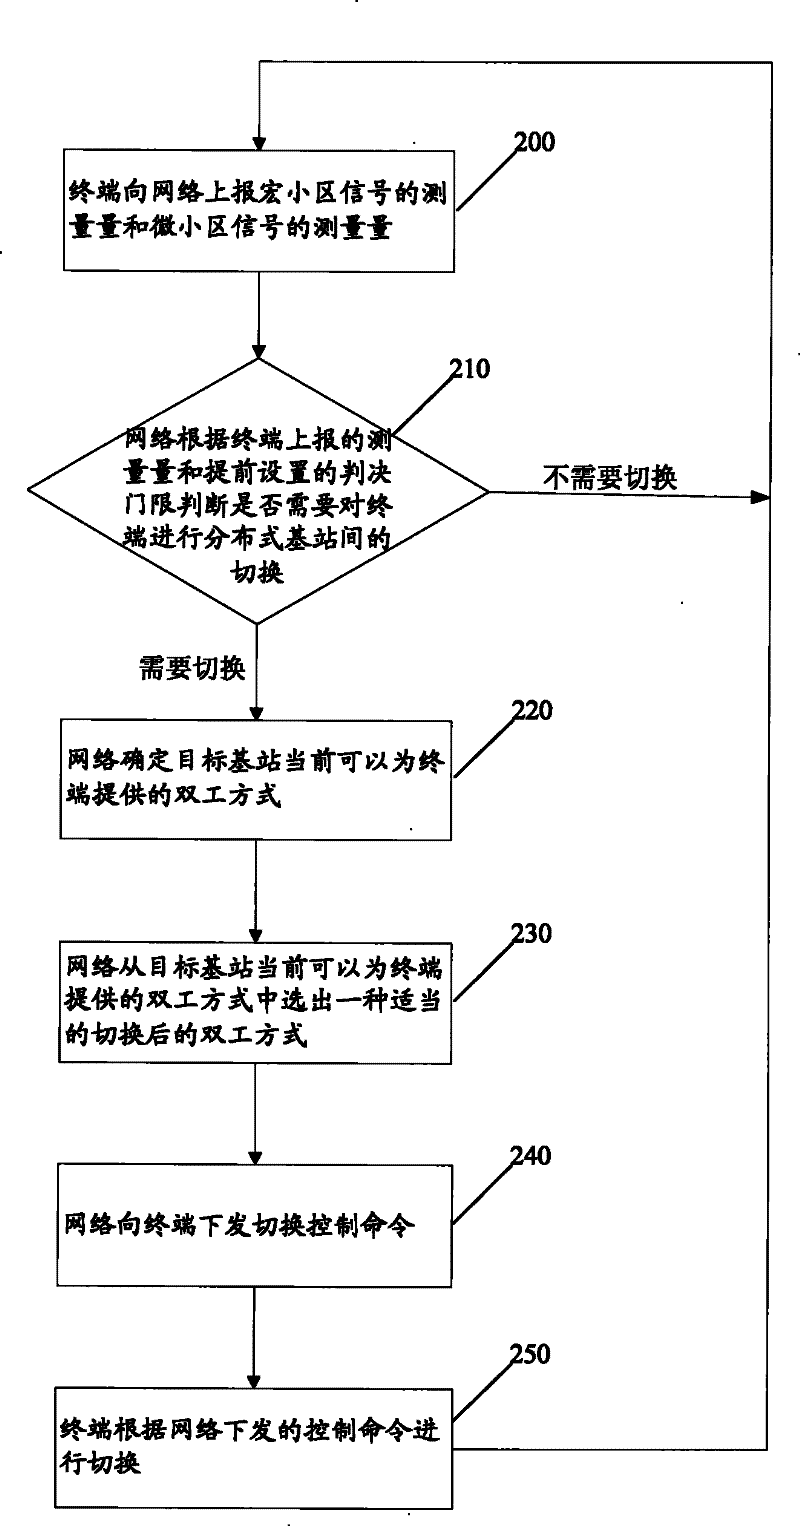 Method for switching terminal among heterogeneous hierarchical distributing type base stations